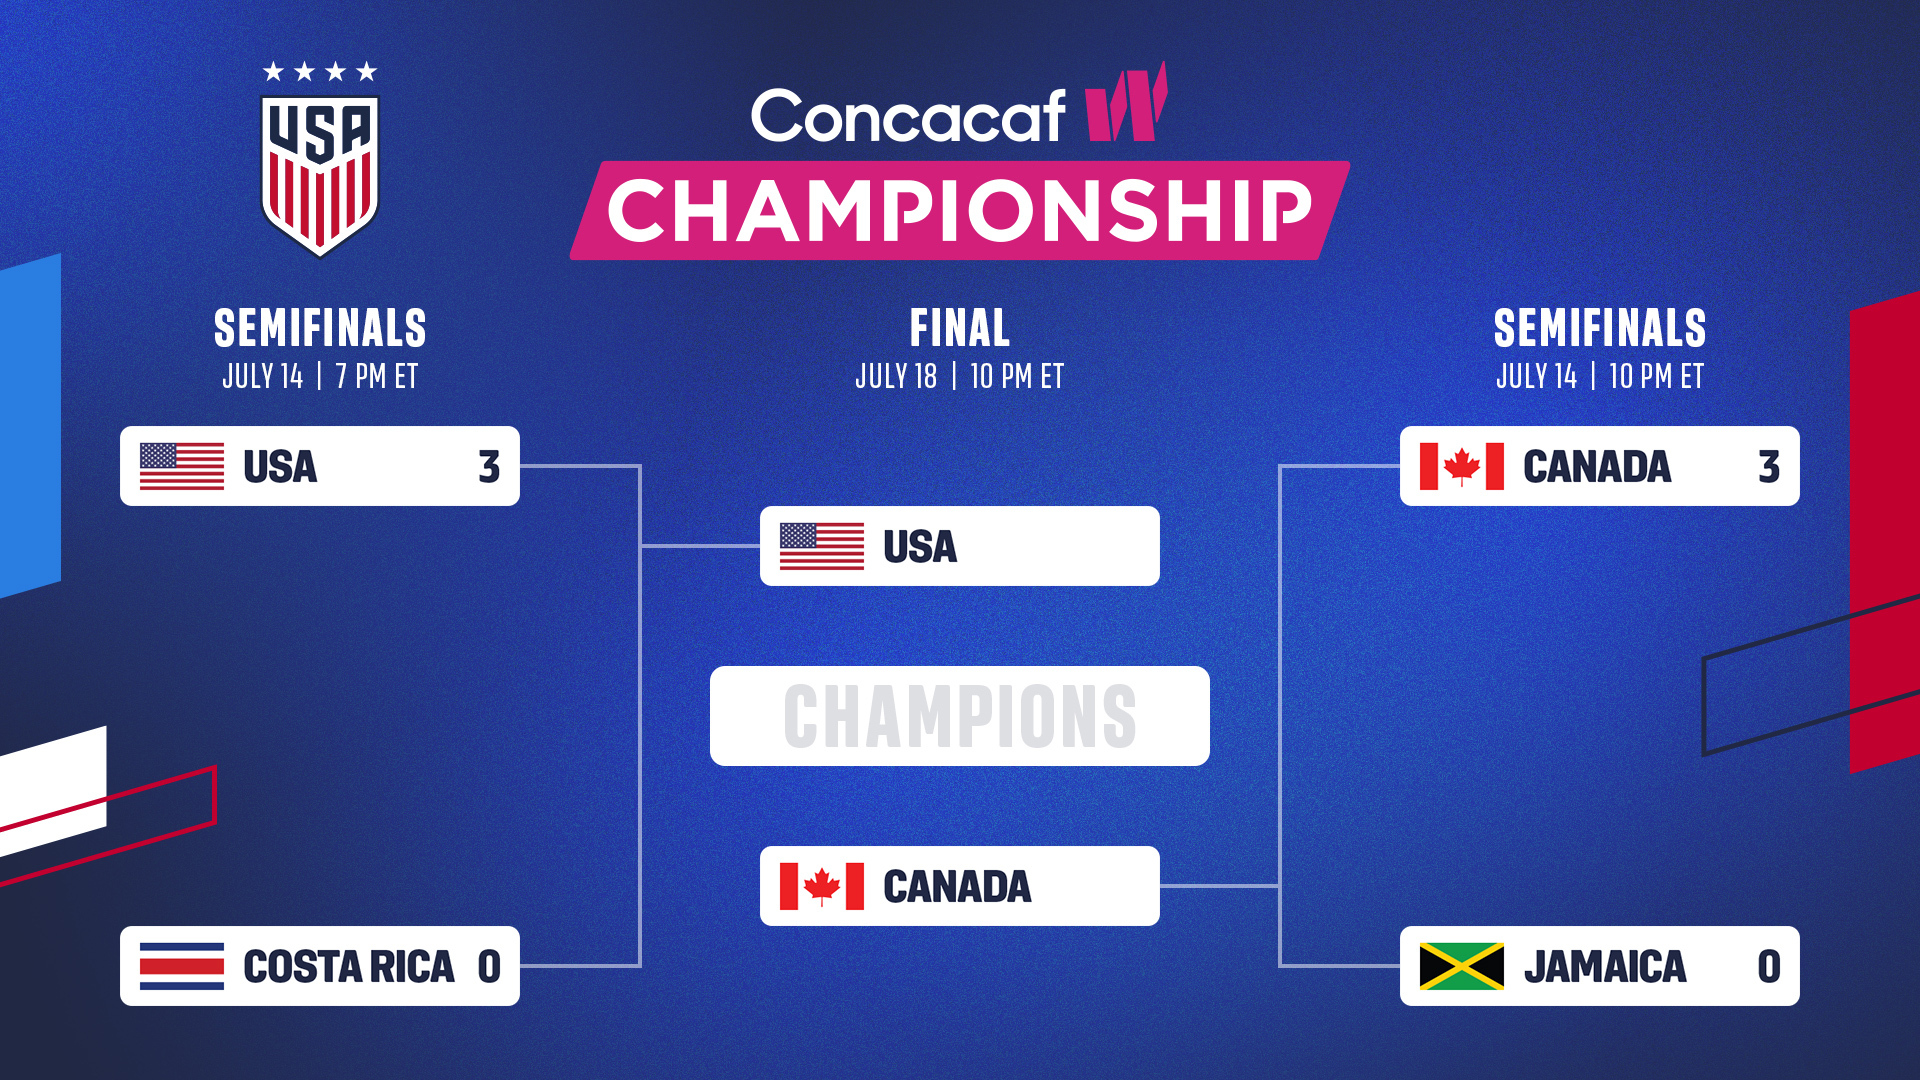 USWNT Faces Canada In Concacaf W Championship Final With Olympic Berth